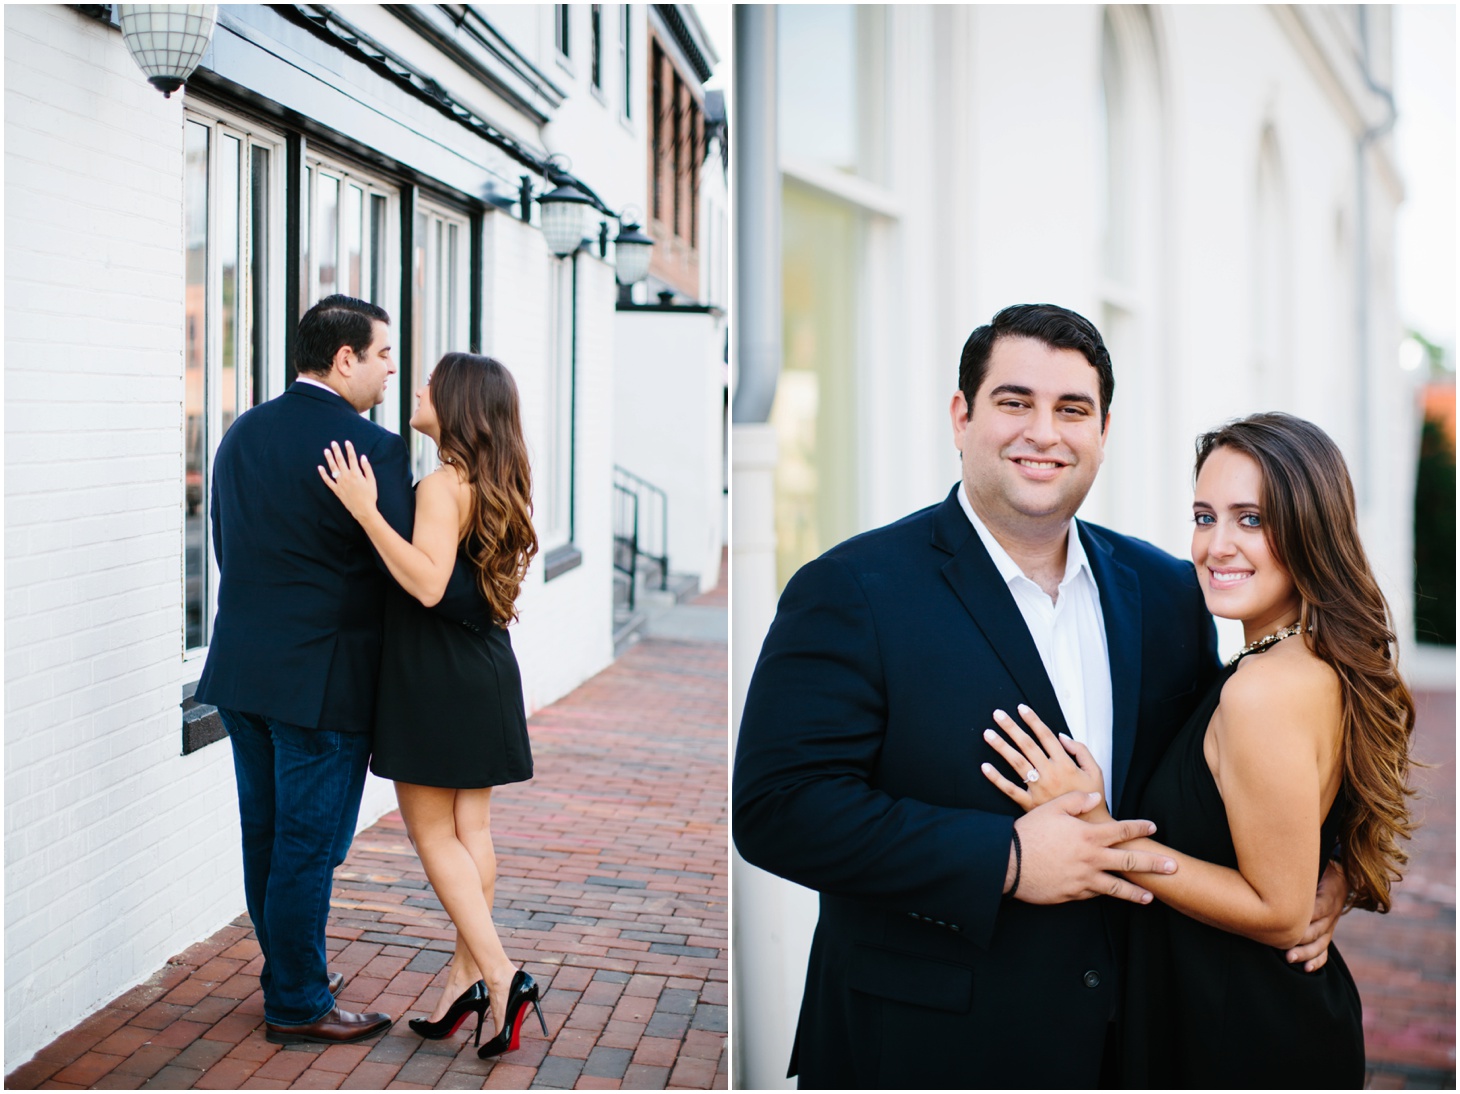 Sunrise Engagement Session in Georgetown by Sarah Bradshaw Photography